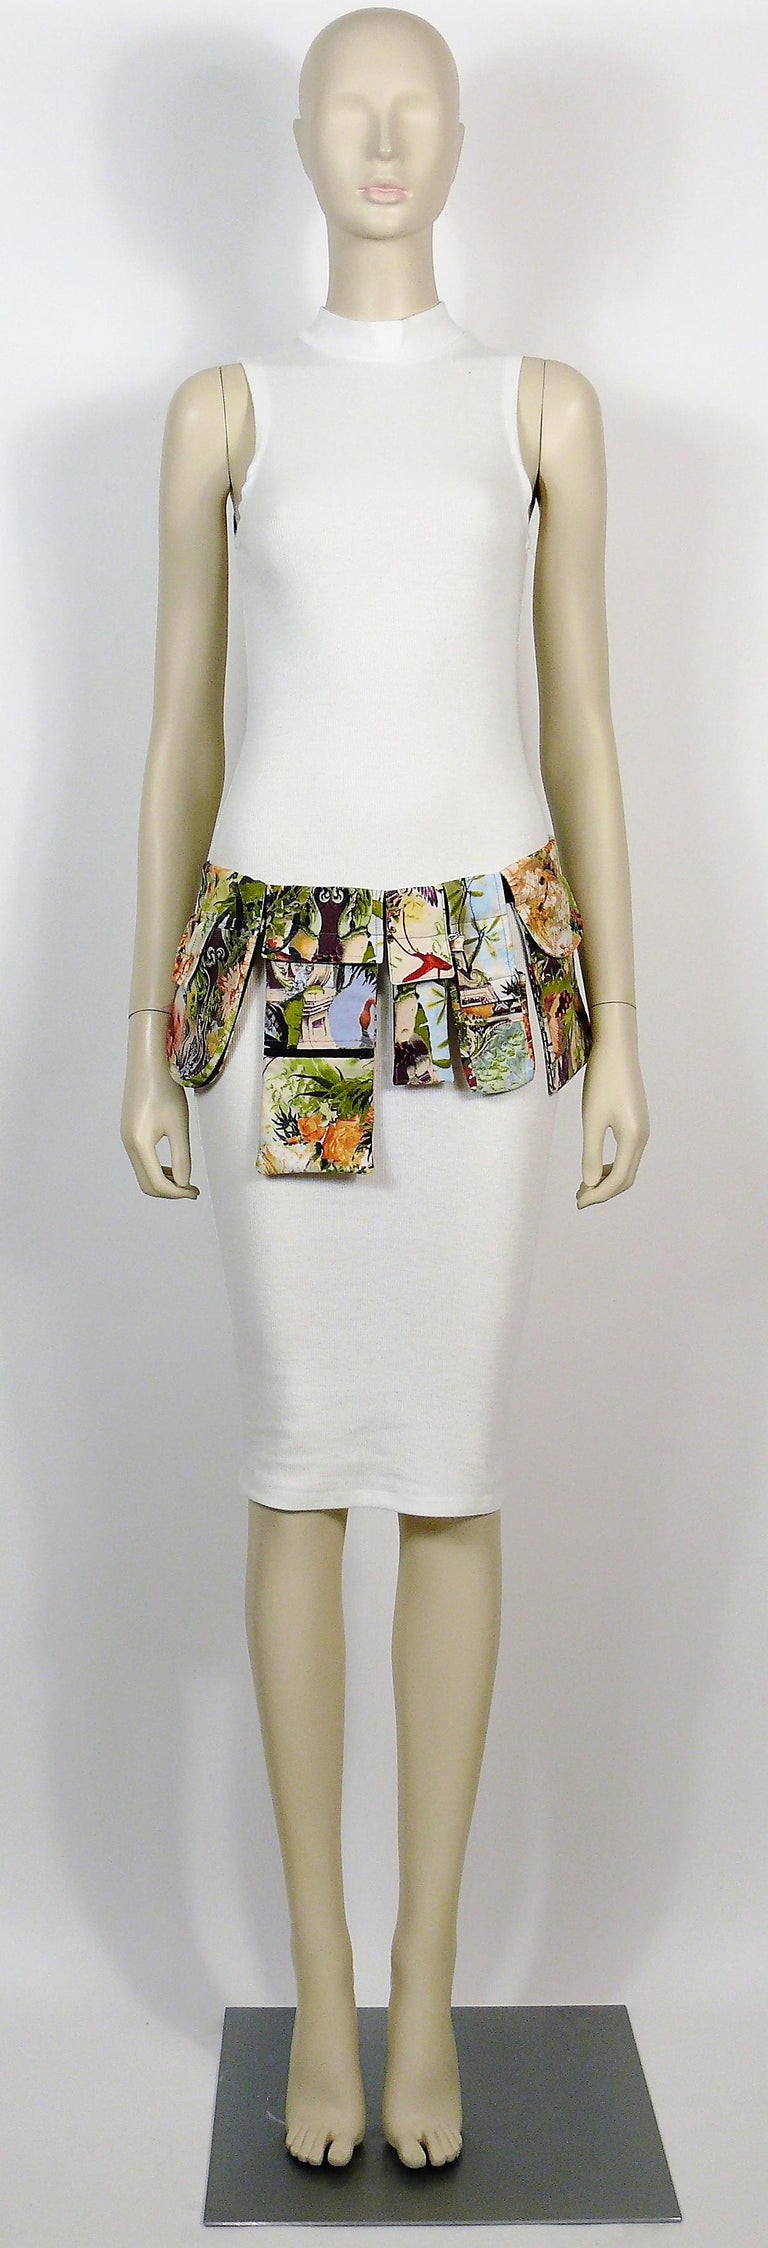 JEAN PAUL GAULTIER utility belt featuring 5 removable pockets (some with velcro closures, others with zippered closure) hanging on an black estaticated strap.

Great multicolored summer tropical print with flamingos, birds and architectural